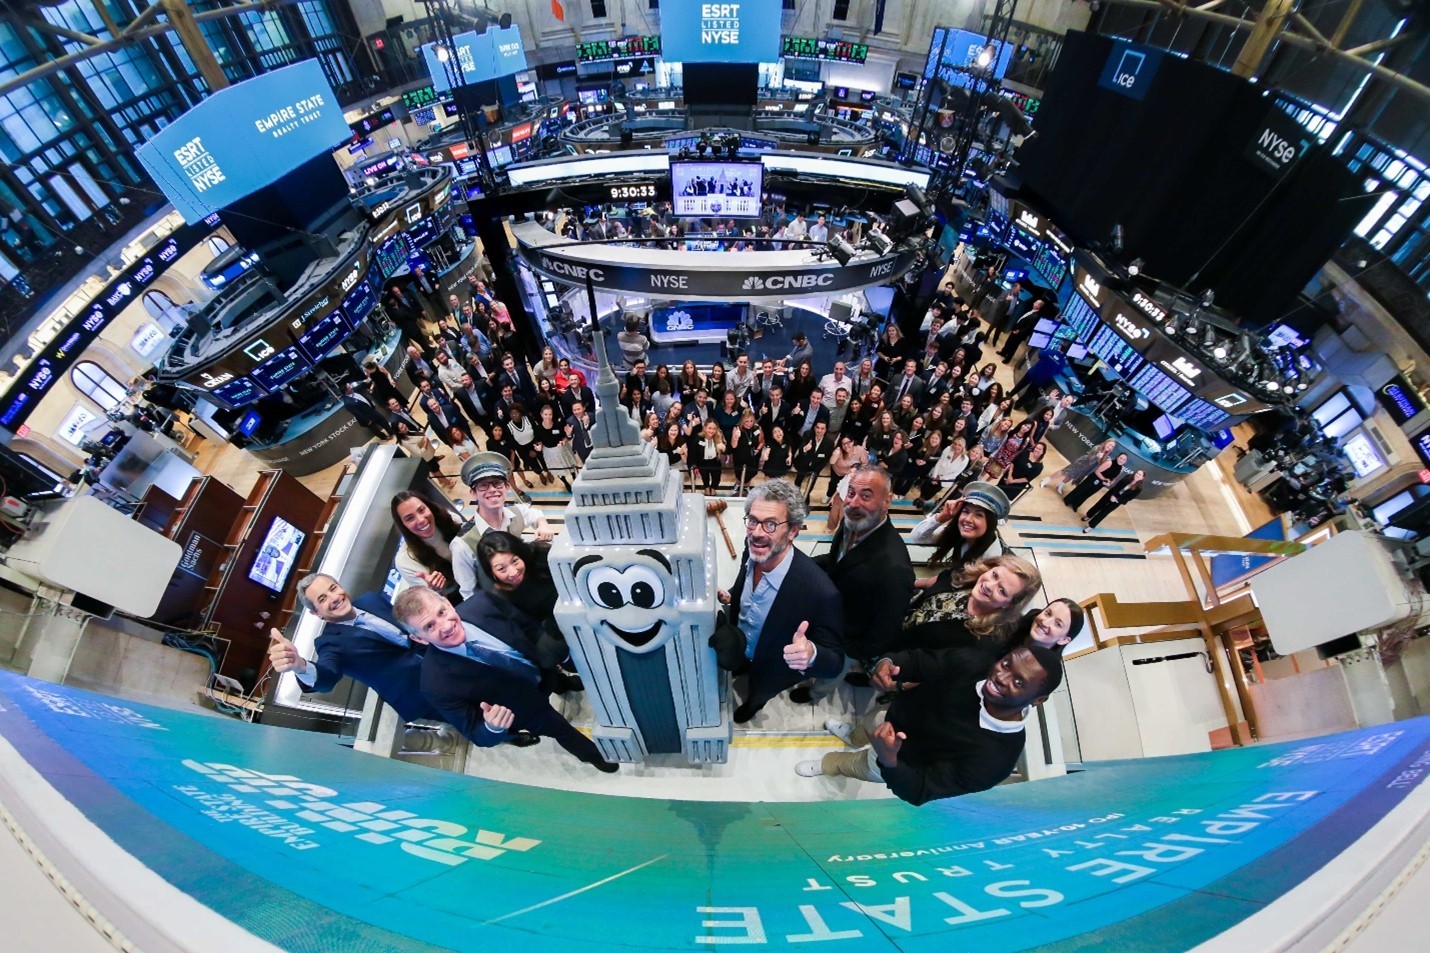 ESRT rings NYSE Opening Bell on October 4, 2023, to celebrate 10th anniversary of IPO.